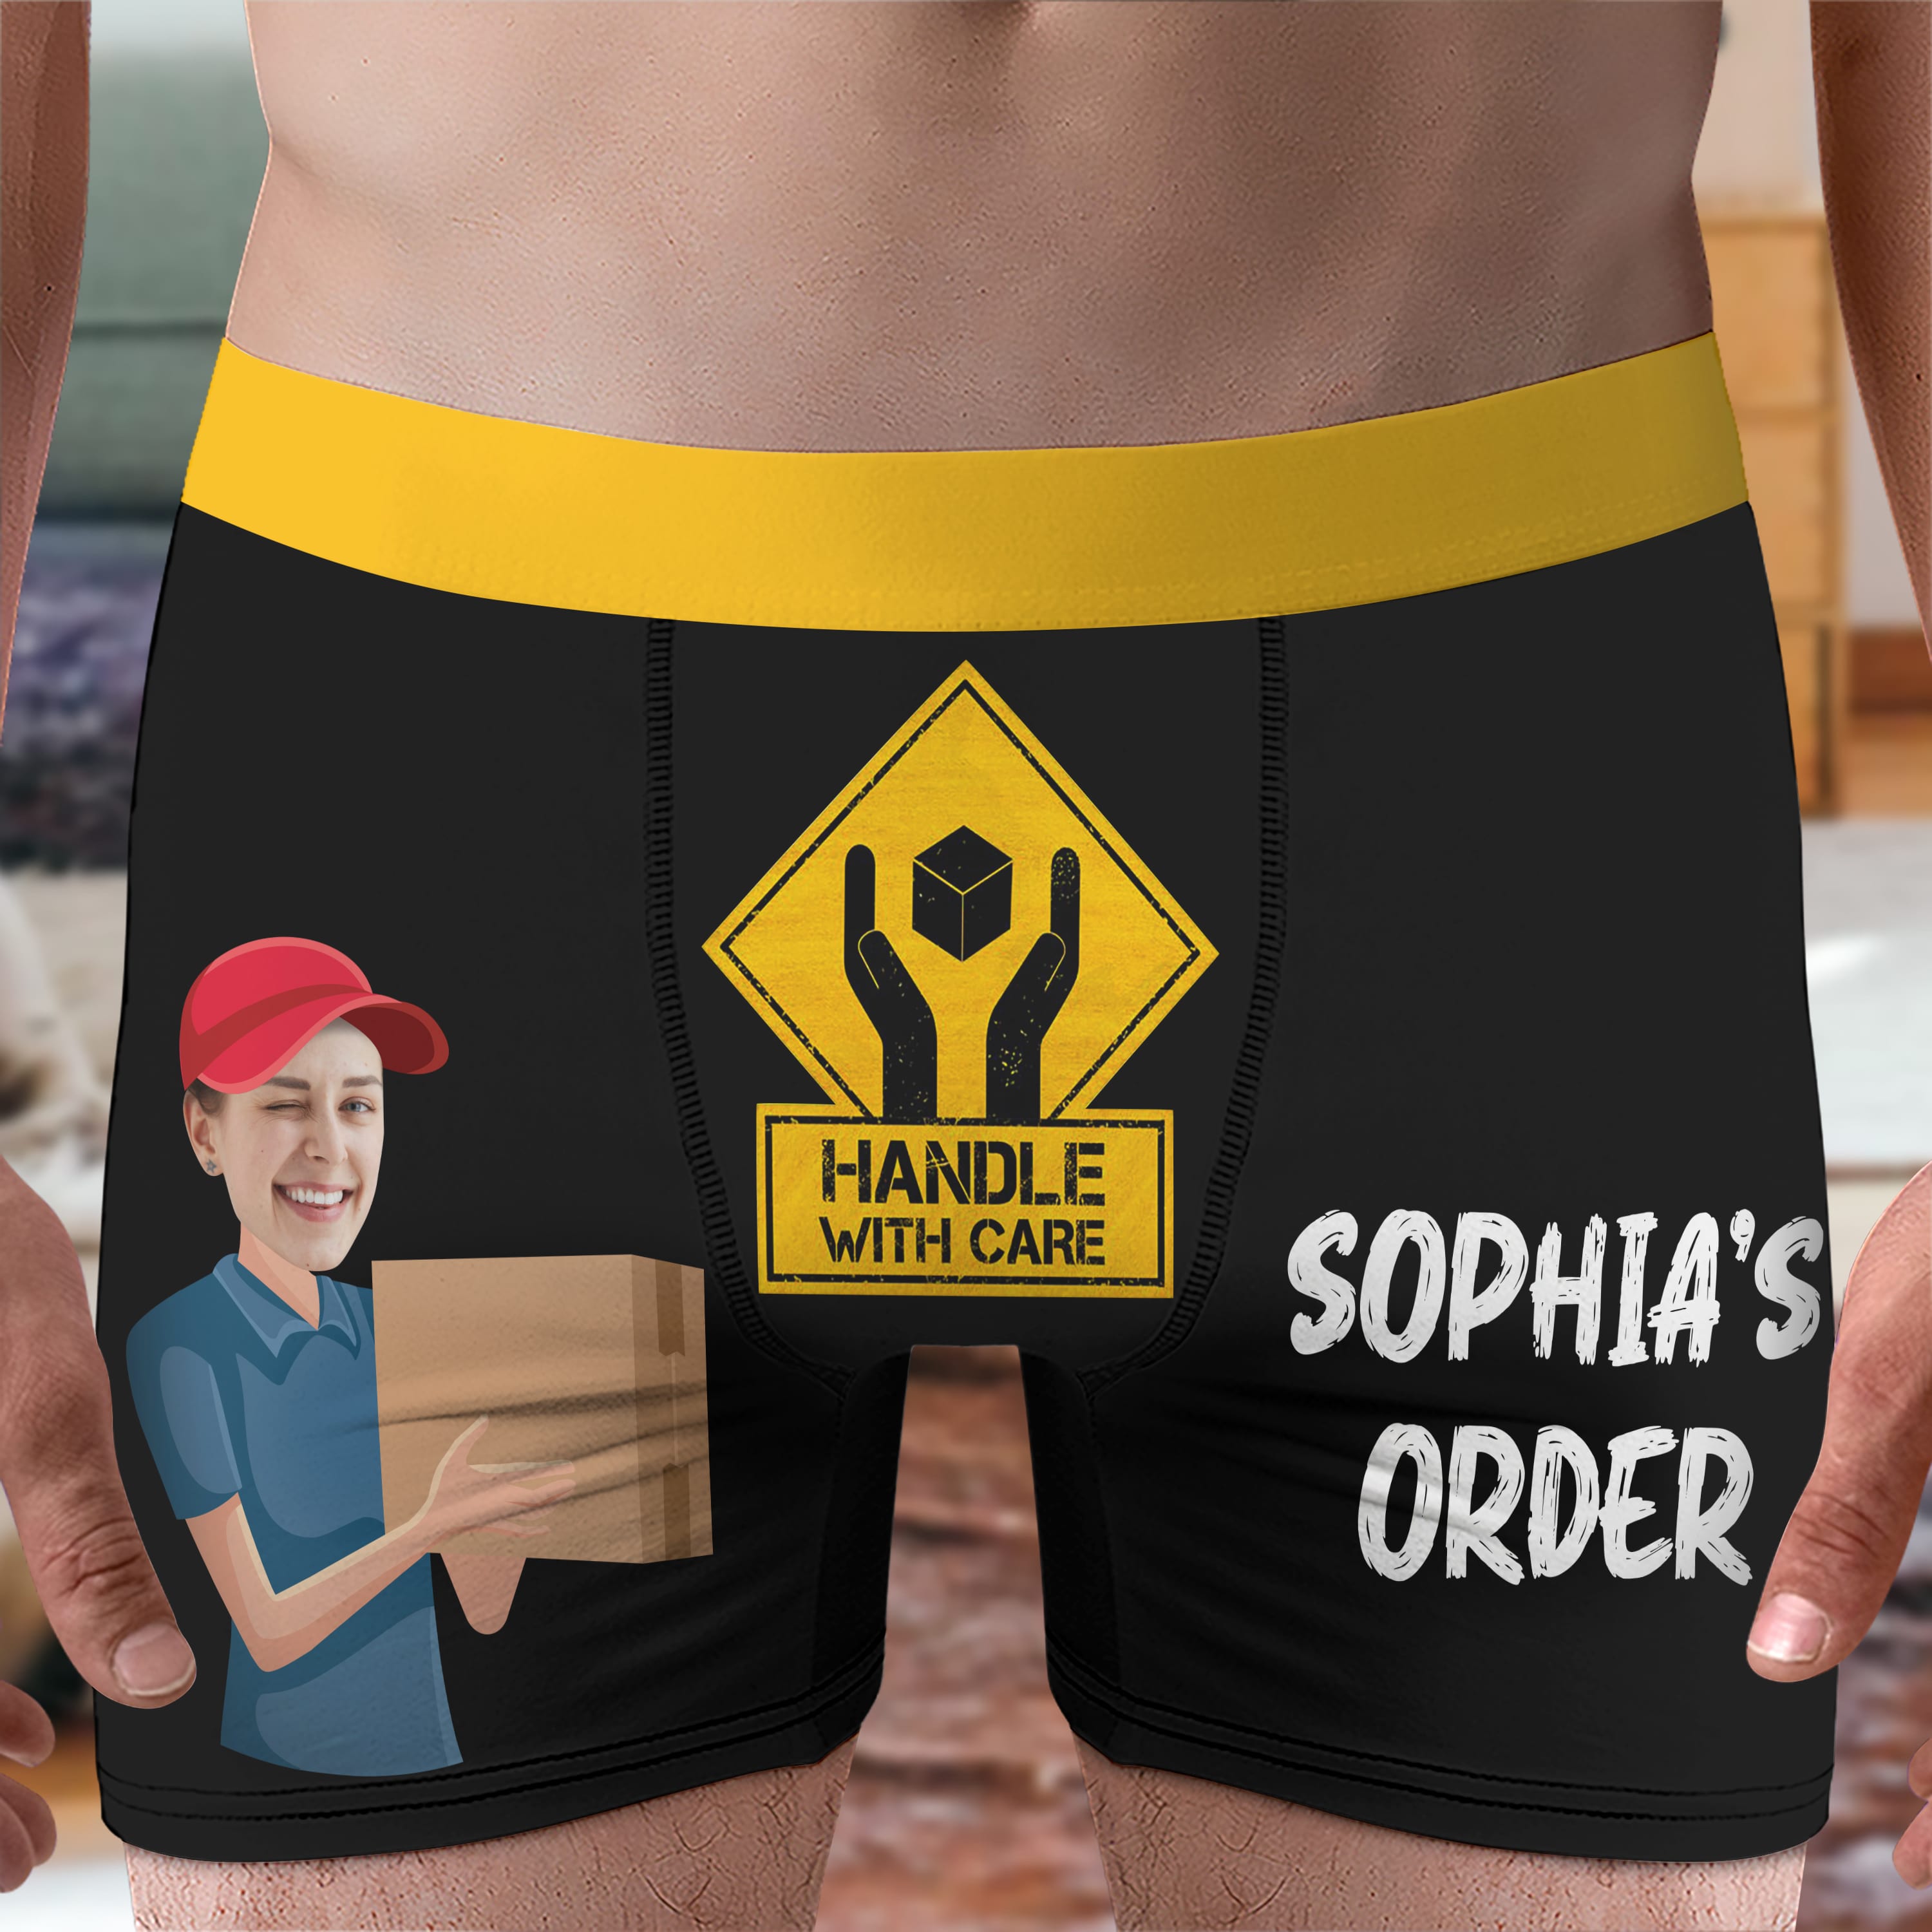 Custom Boxers With Face for Boyfriend Husband Dad, Custom Underwear With  Photo, Picture Boxer Briefs, Photo Boxers,personalized Gifts. -  Canada